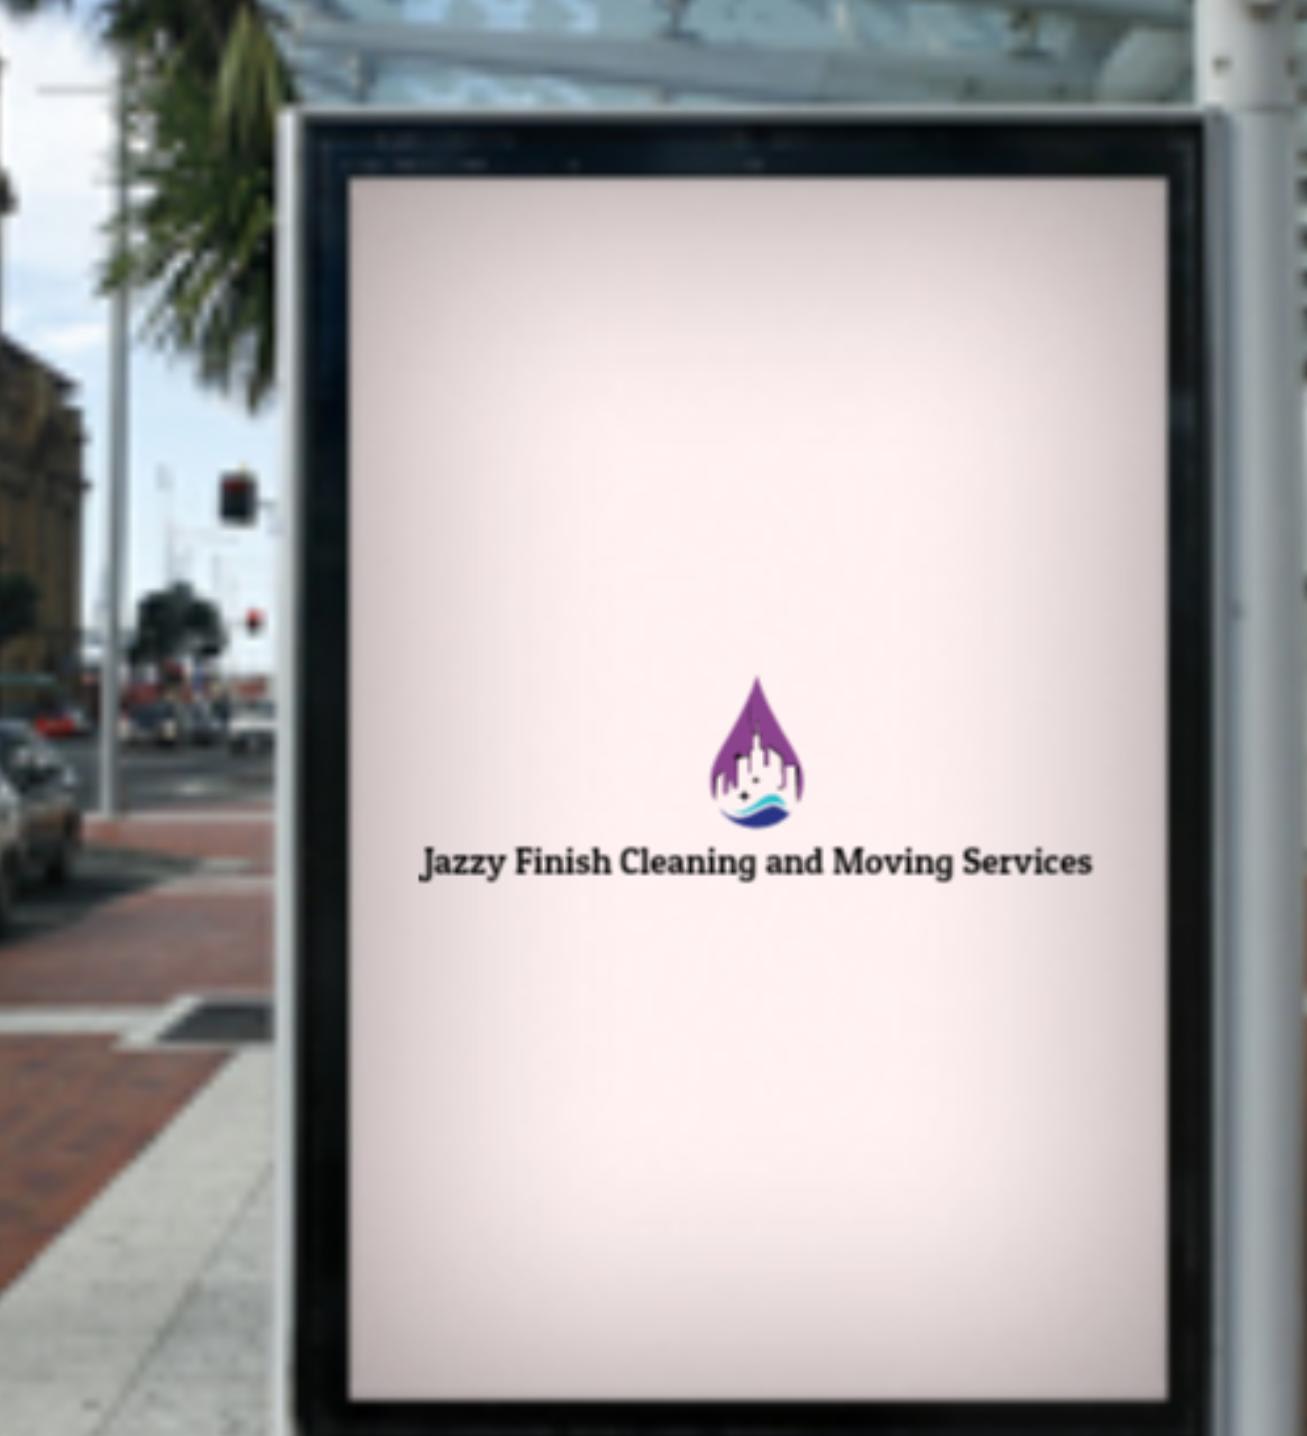 Jazzy Finish Cleaning & Moving Services